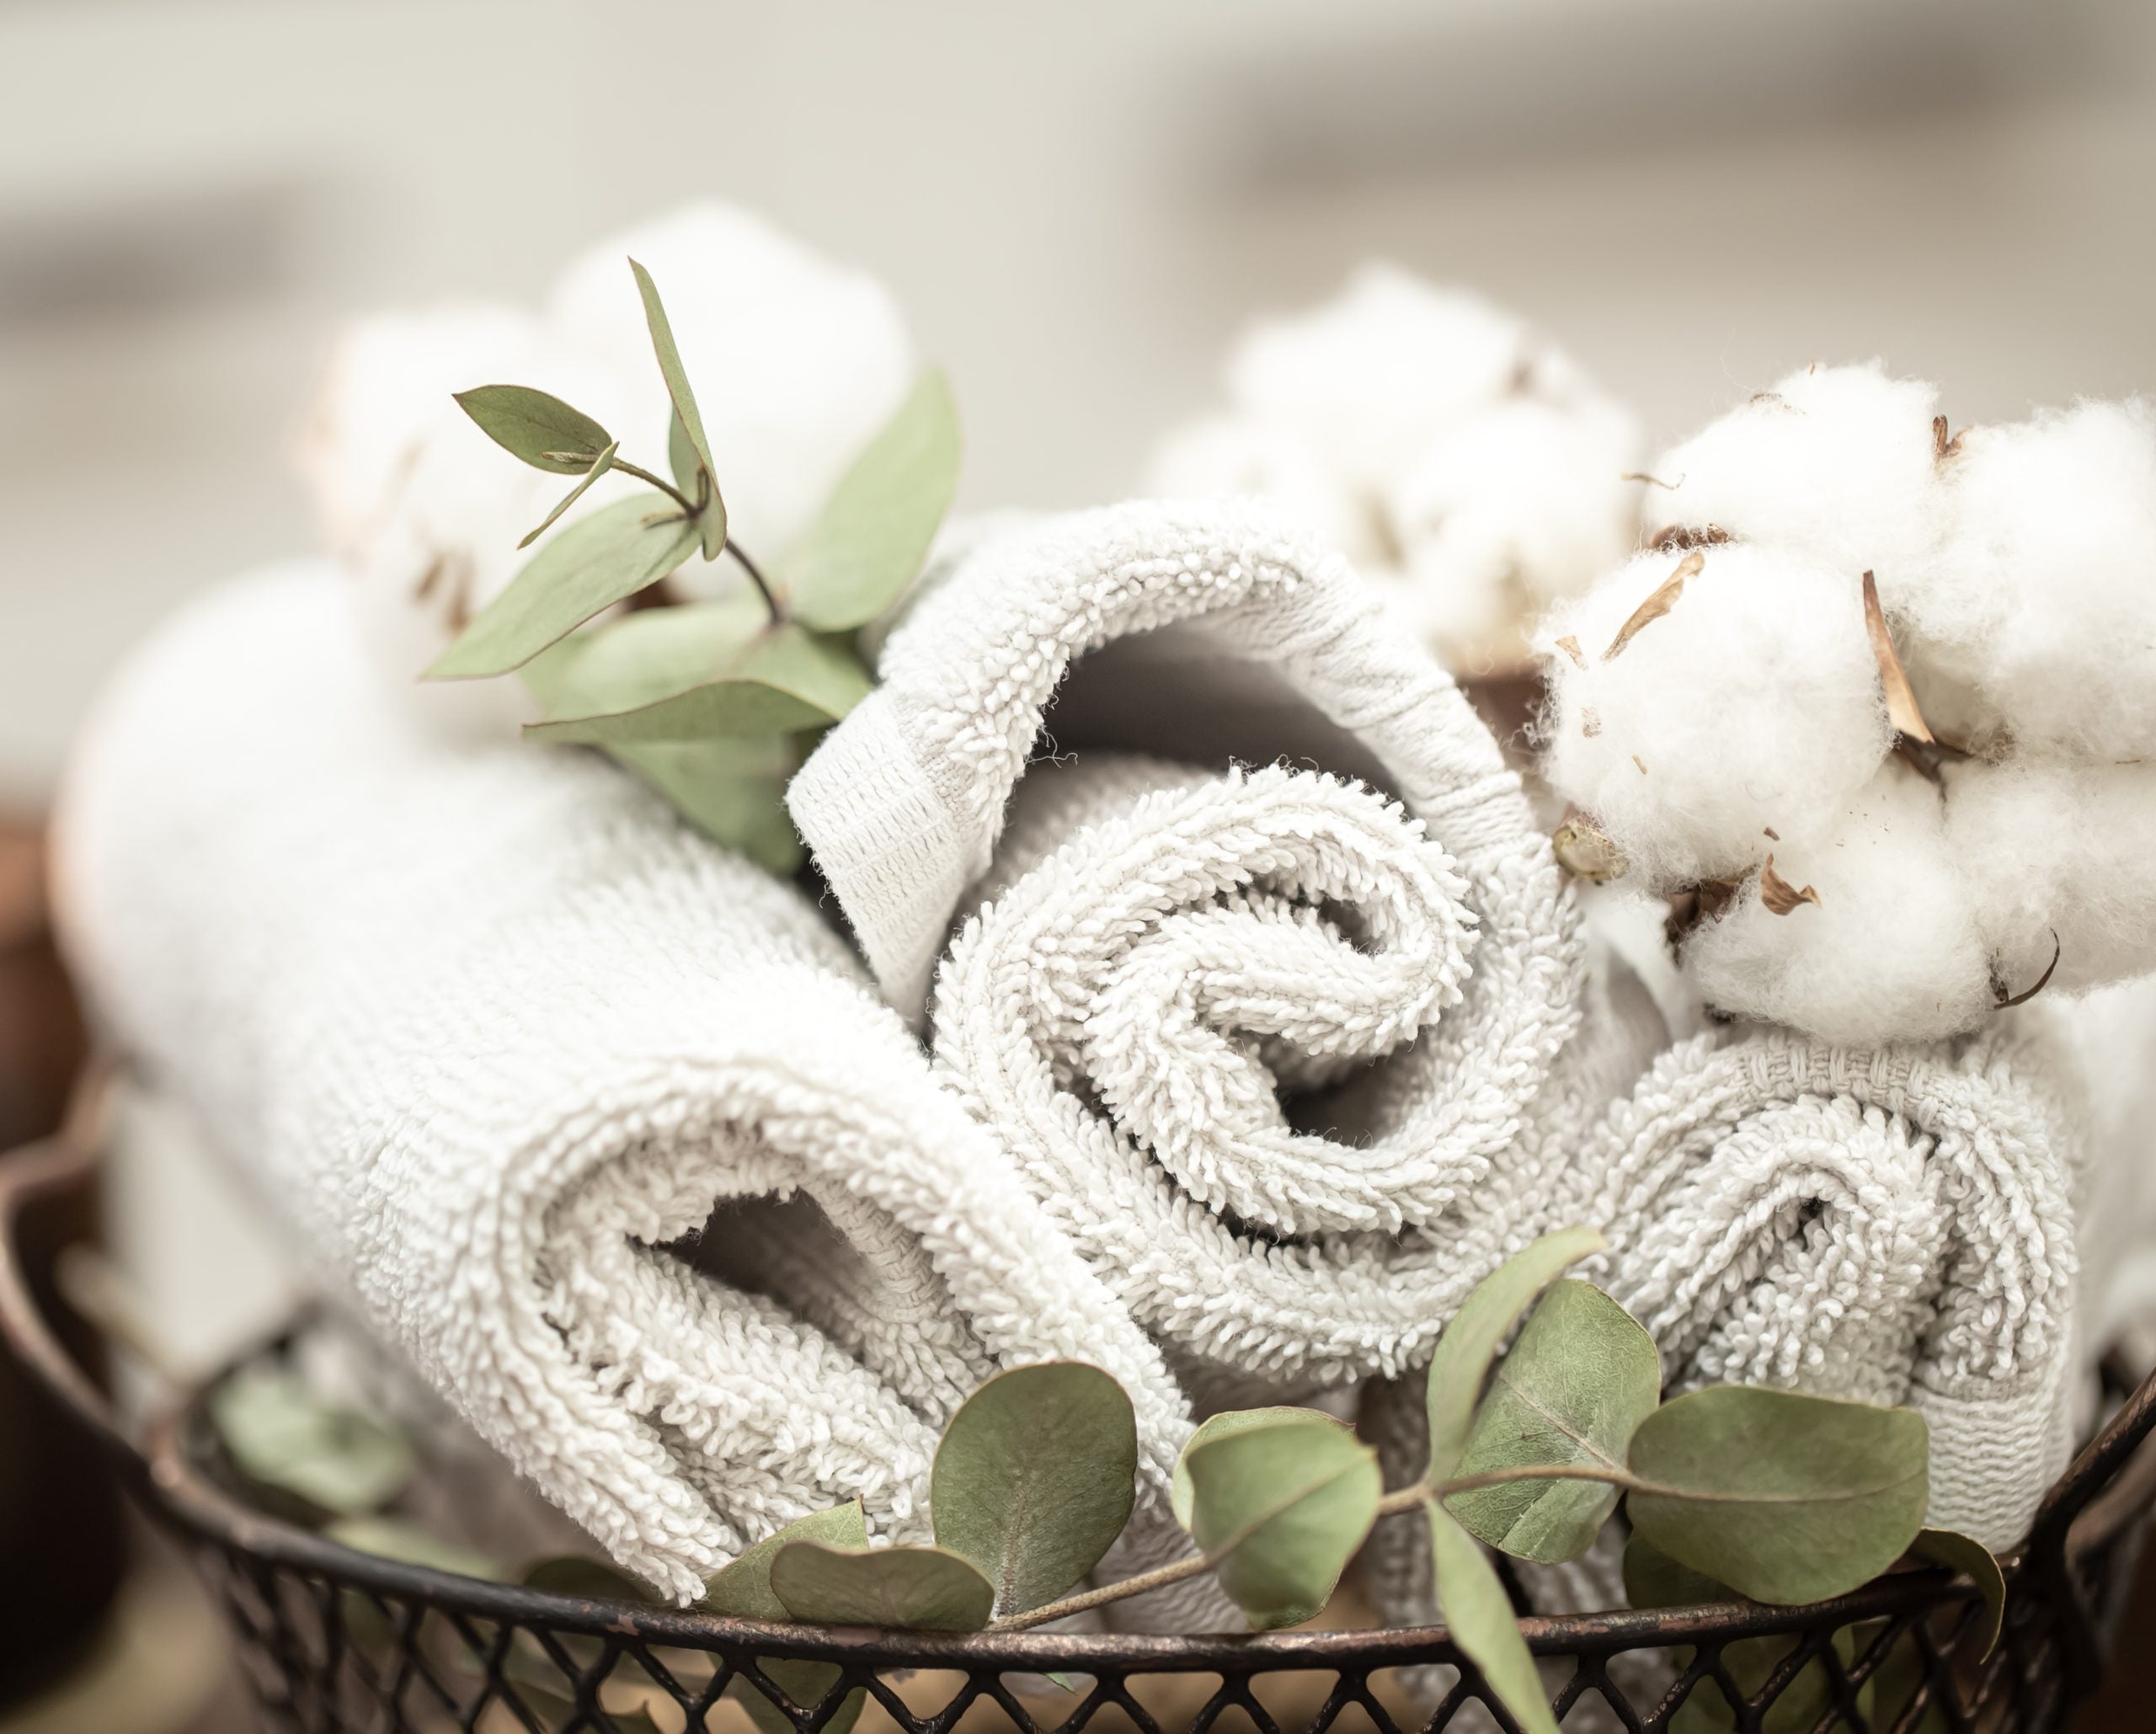 How To Decorate Your Bathroom with Towels- Best Ways